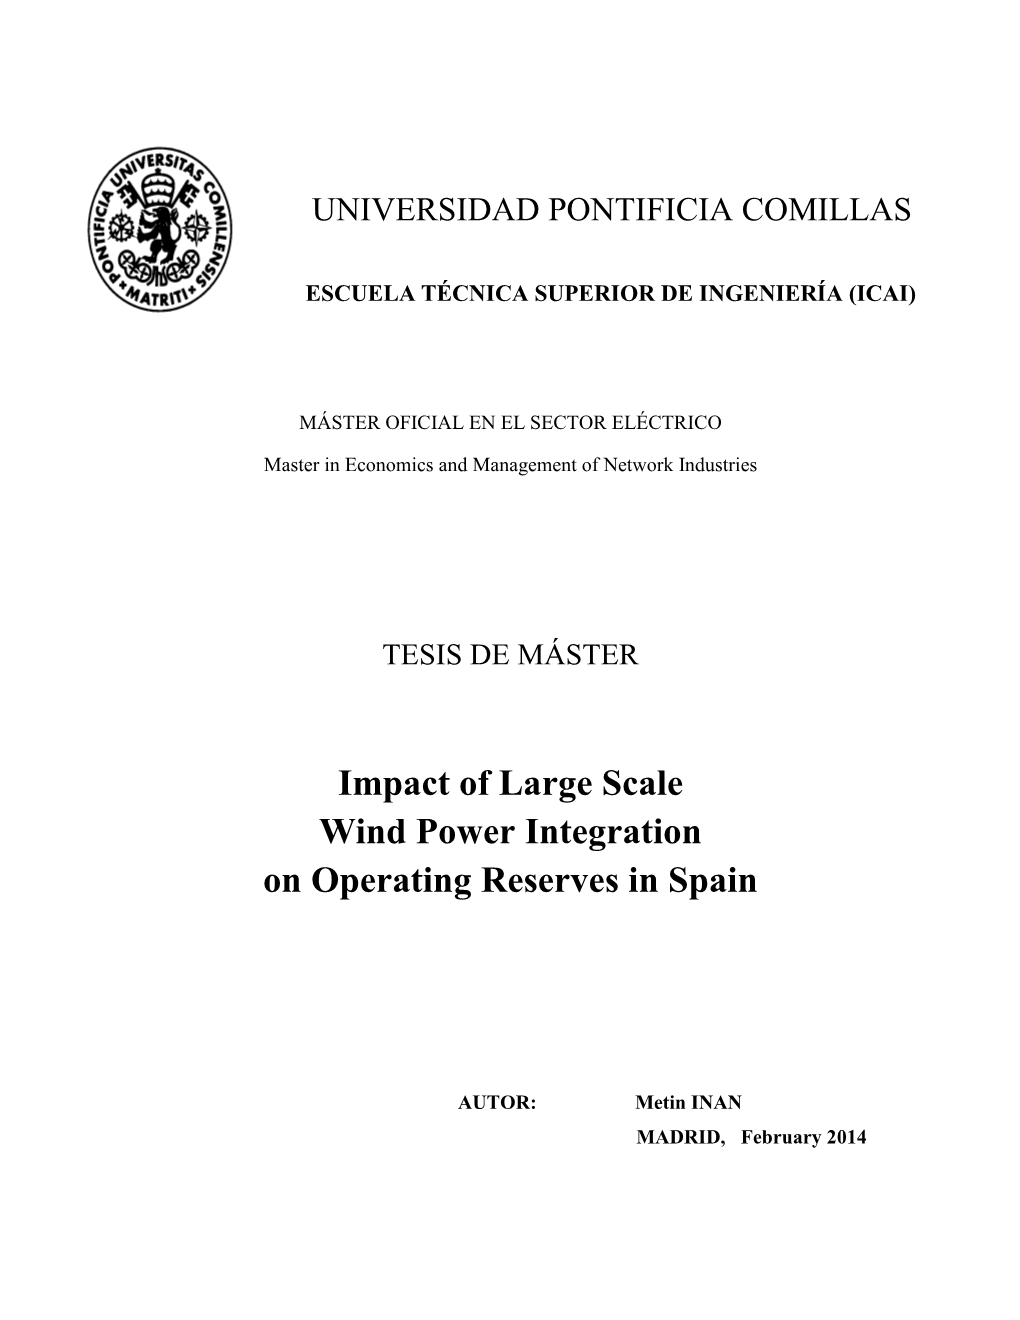 Impact of Large Scale Wind Power Integration on Operating Reserves in Spain